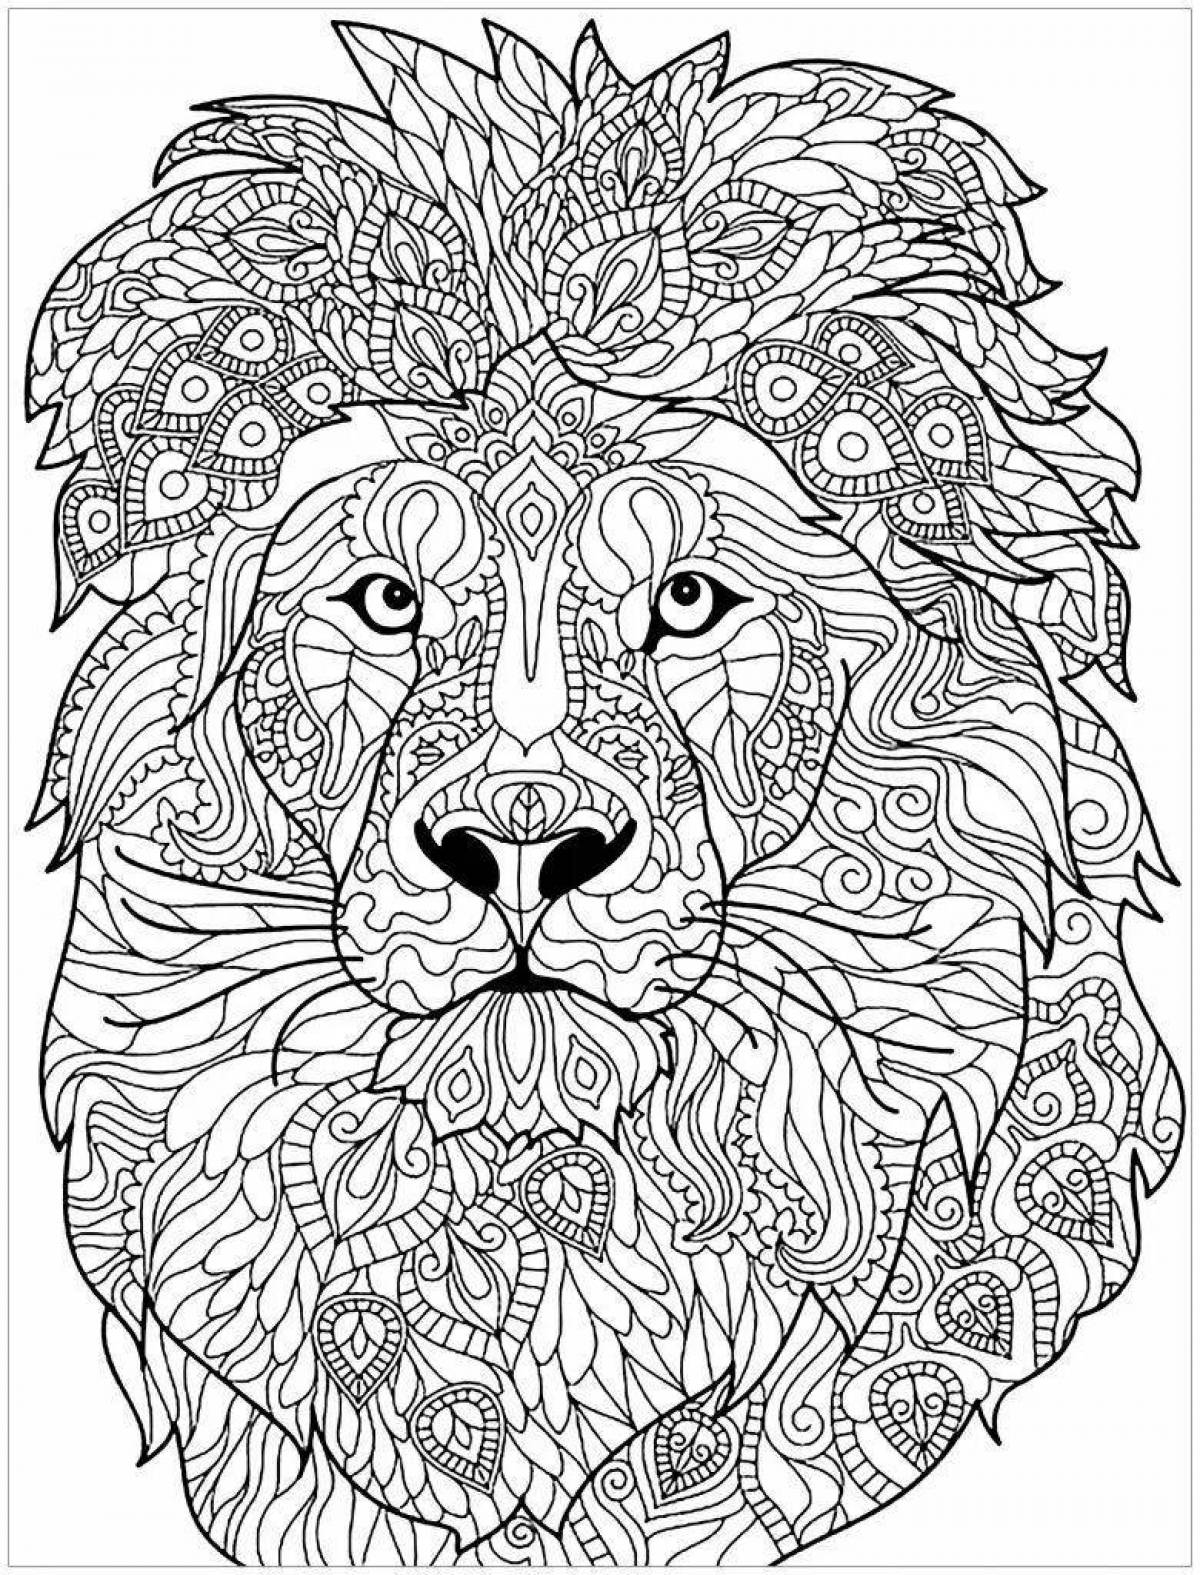 Coloring book set of cute anti-stress animals